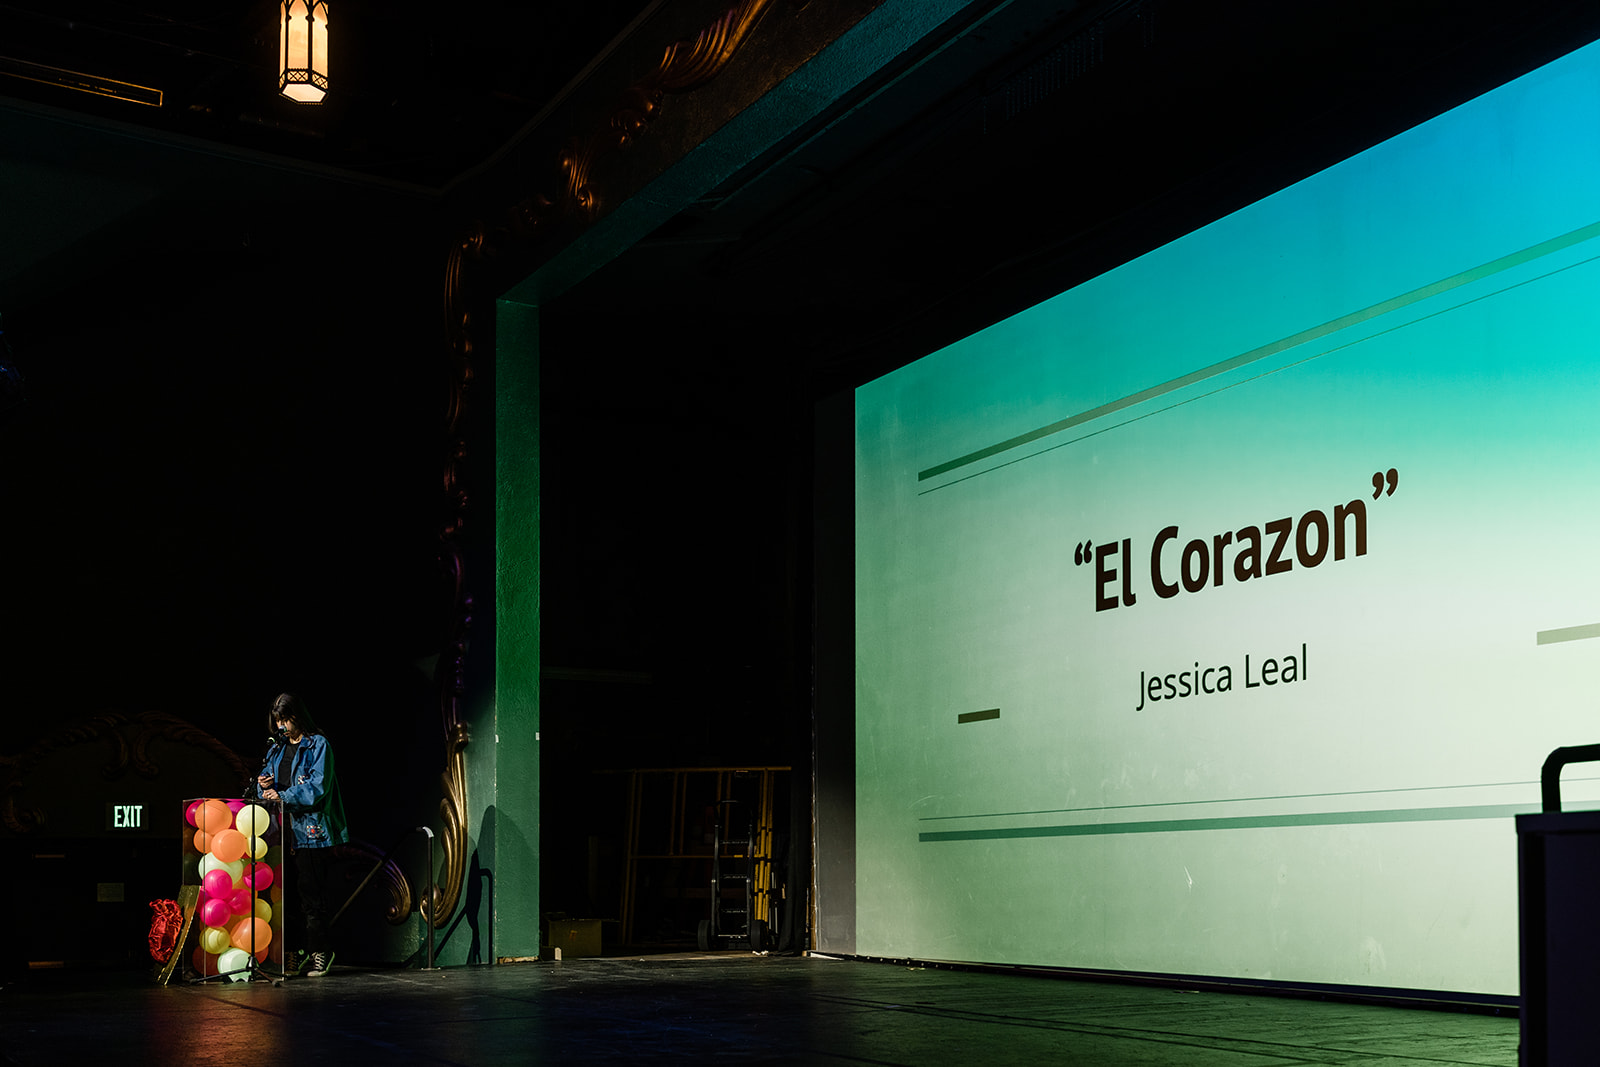 Photo of a young woman standing at a podium that is filled with balloons. She is onstage in front of a giant white screen that says "El Corazon" Jessica Leal